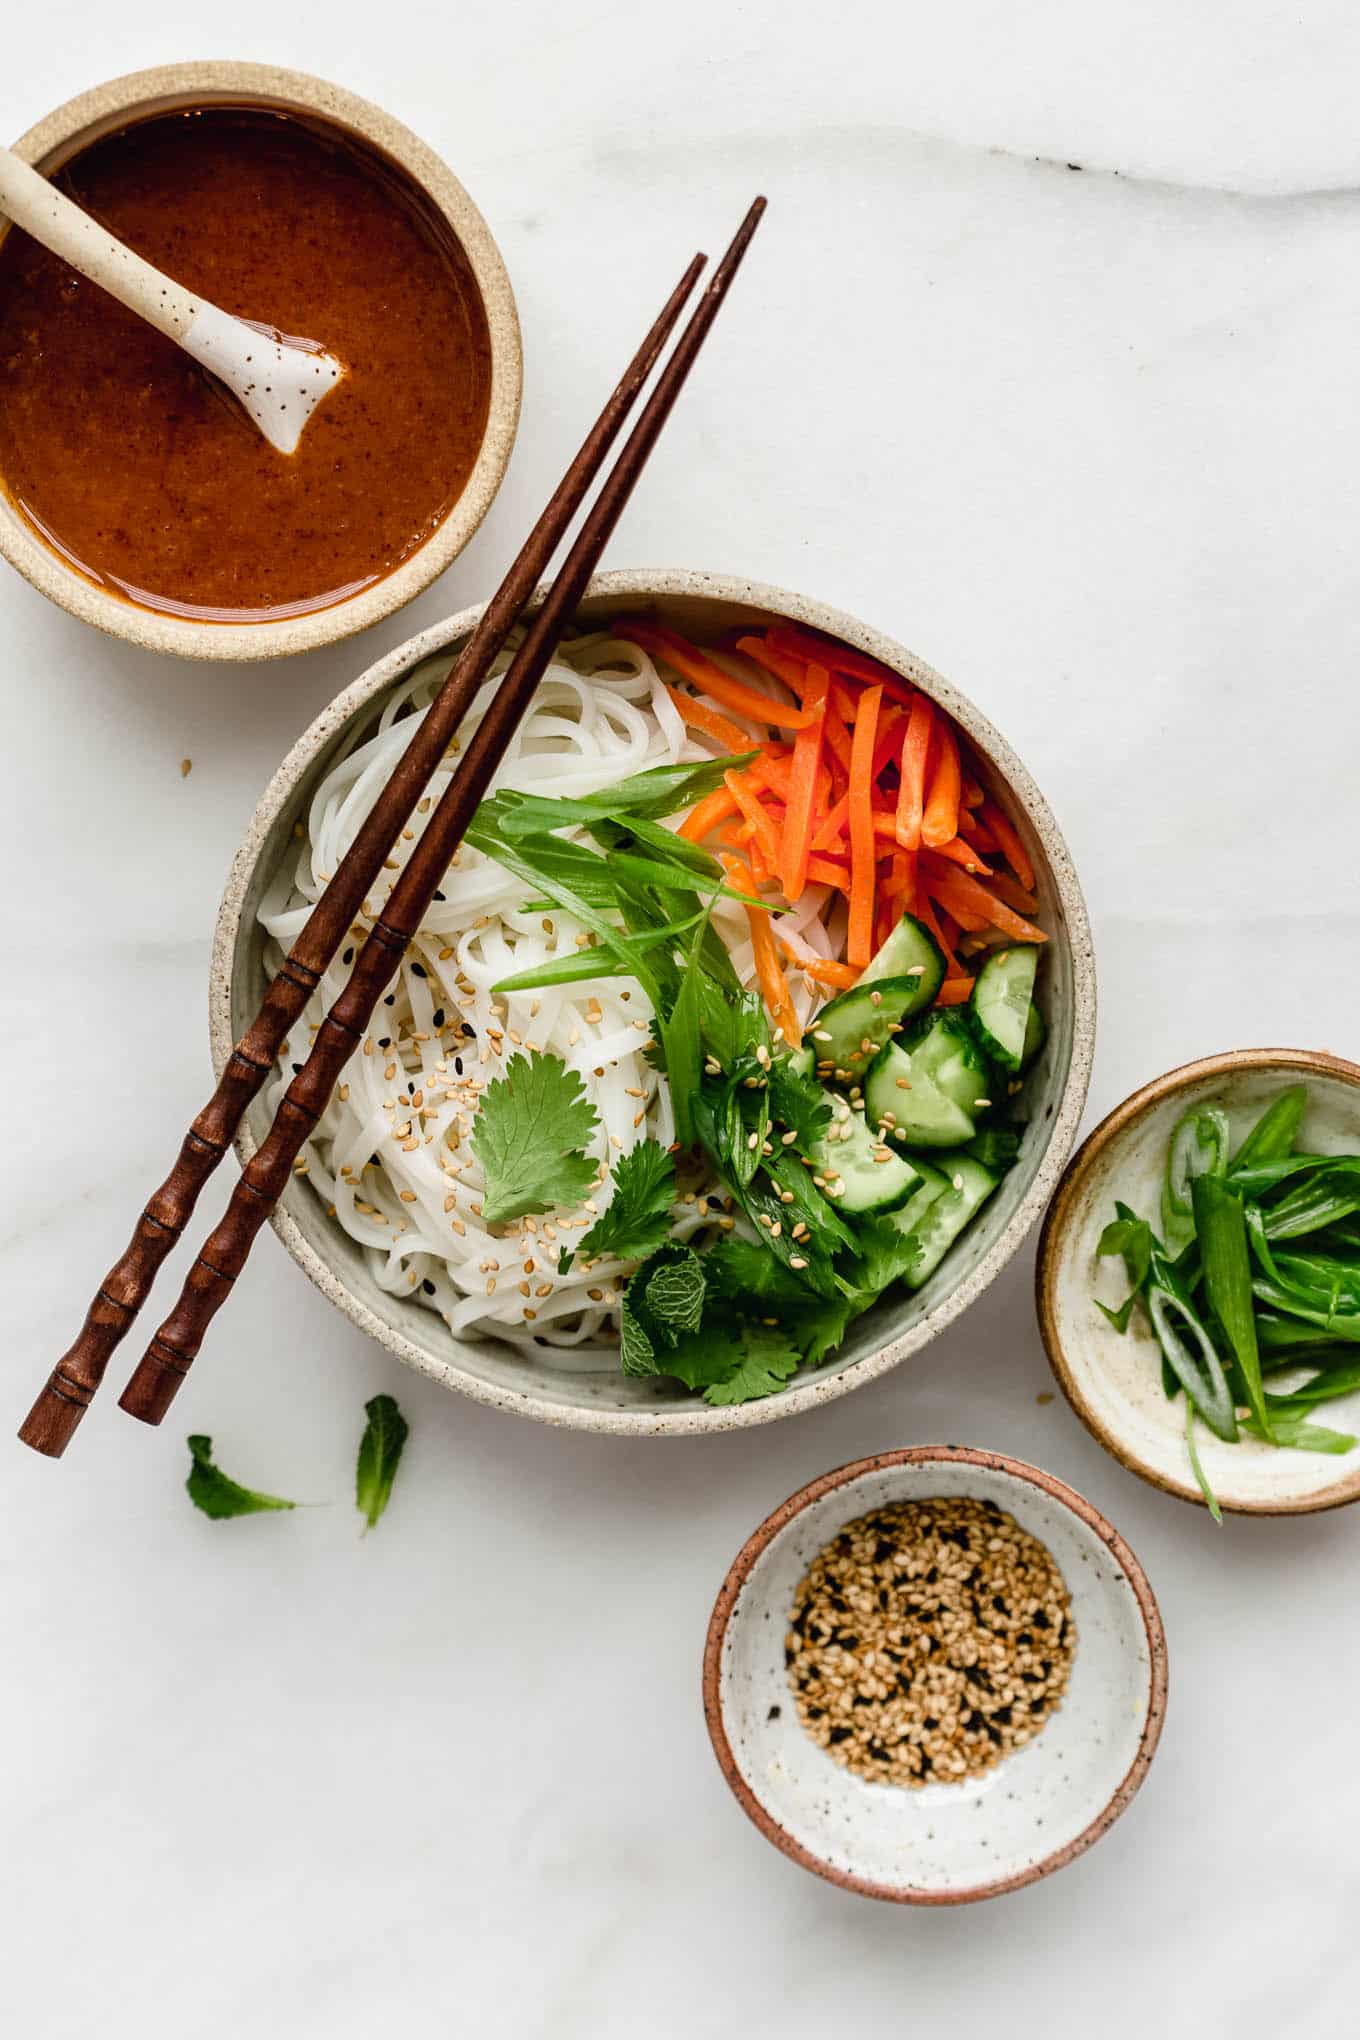 A spring roll noodle bowl with almond butter sauce on the side